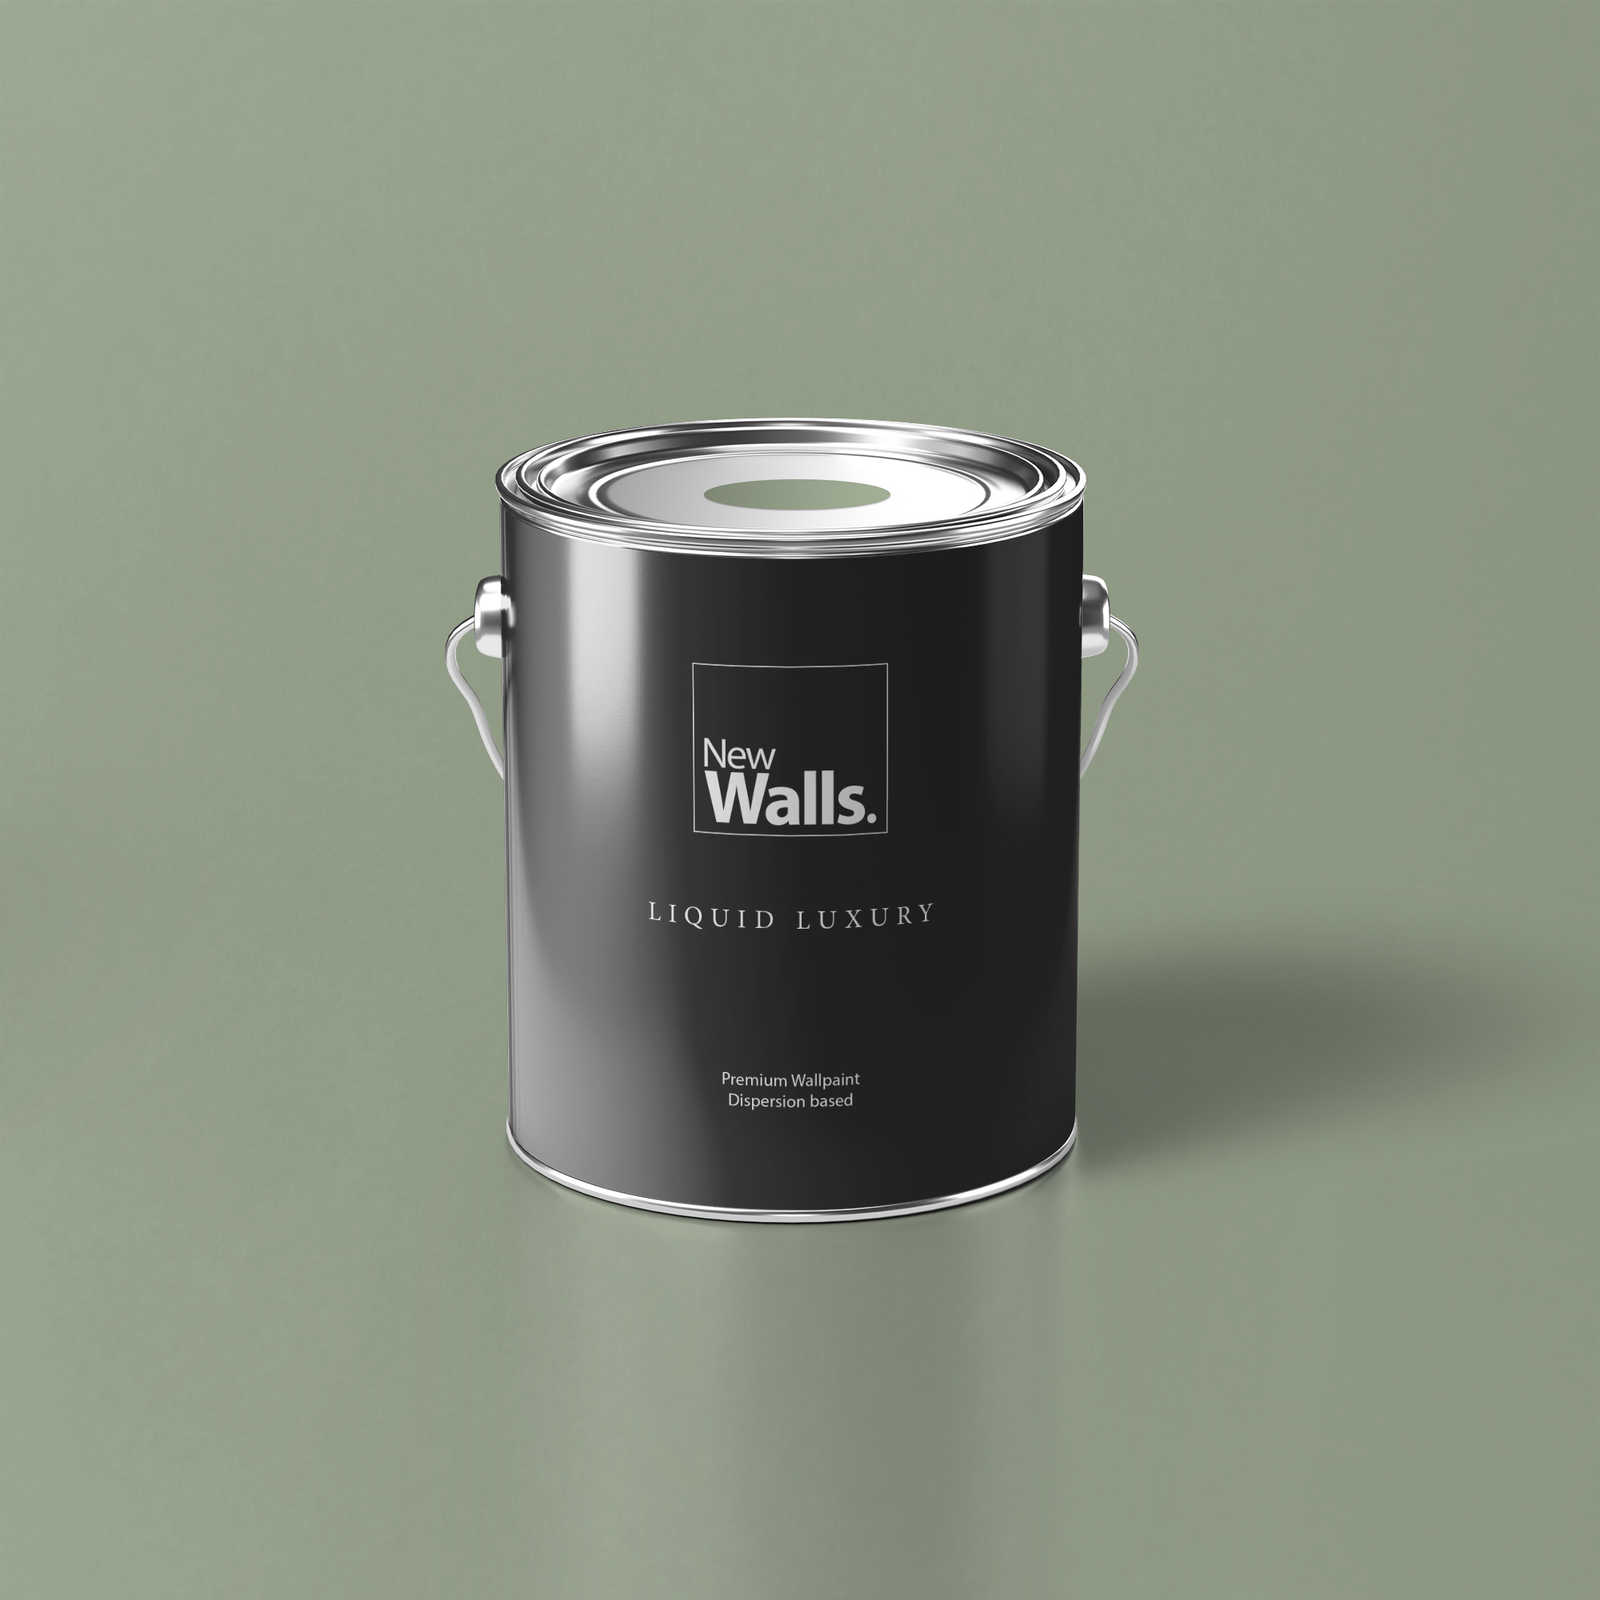 Premium Wall Paint Earthy Olive Green »Gorgeous Green« NW502 – 5 litre
